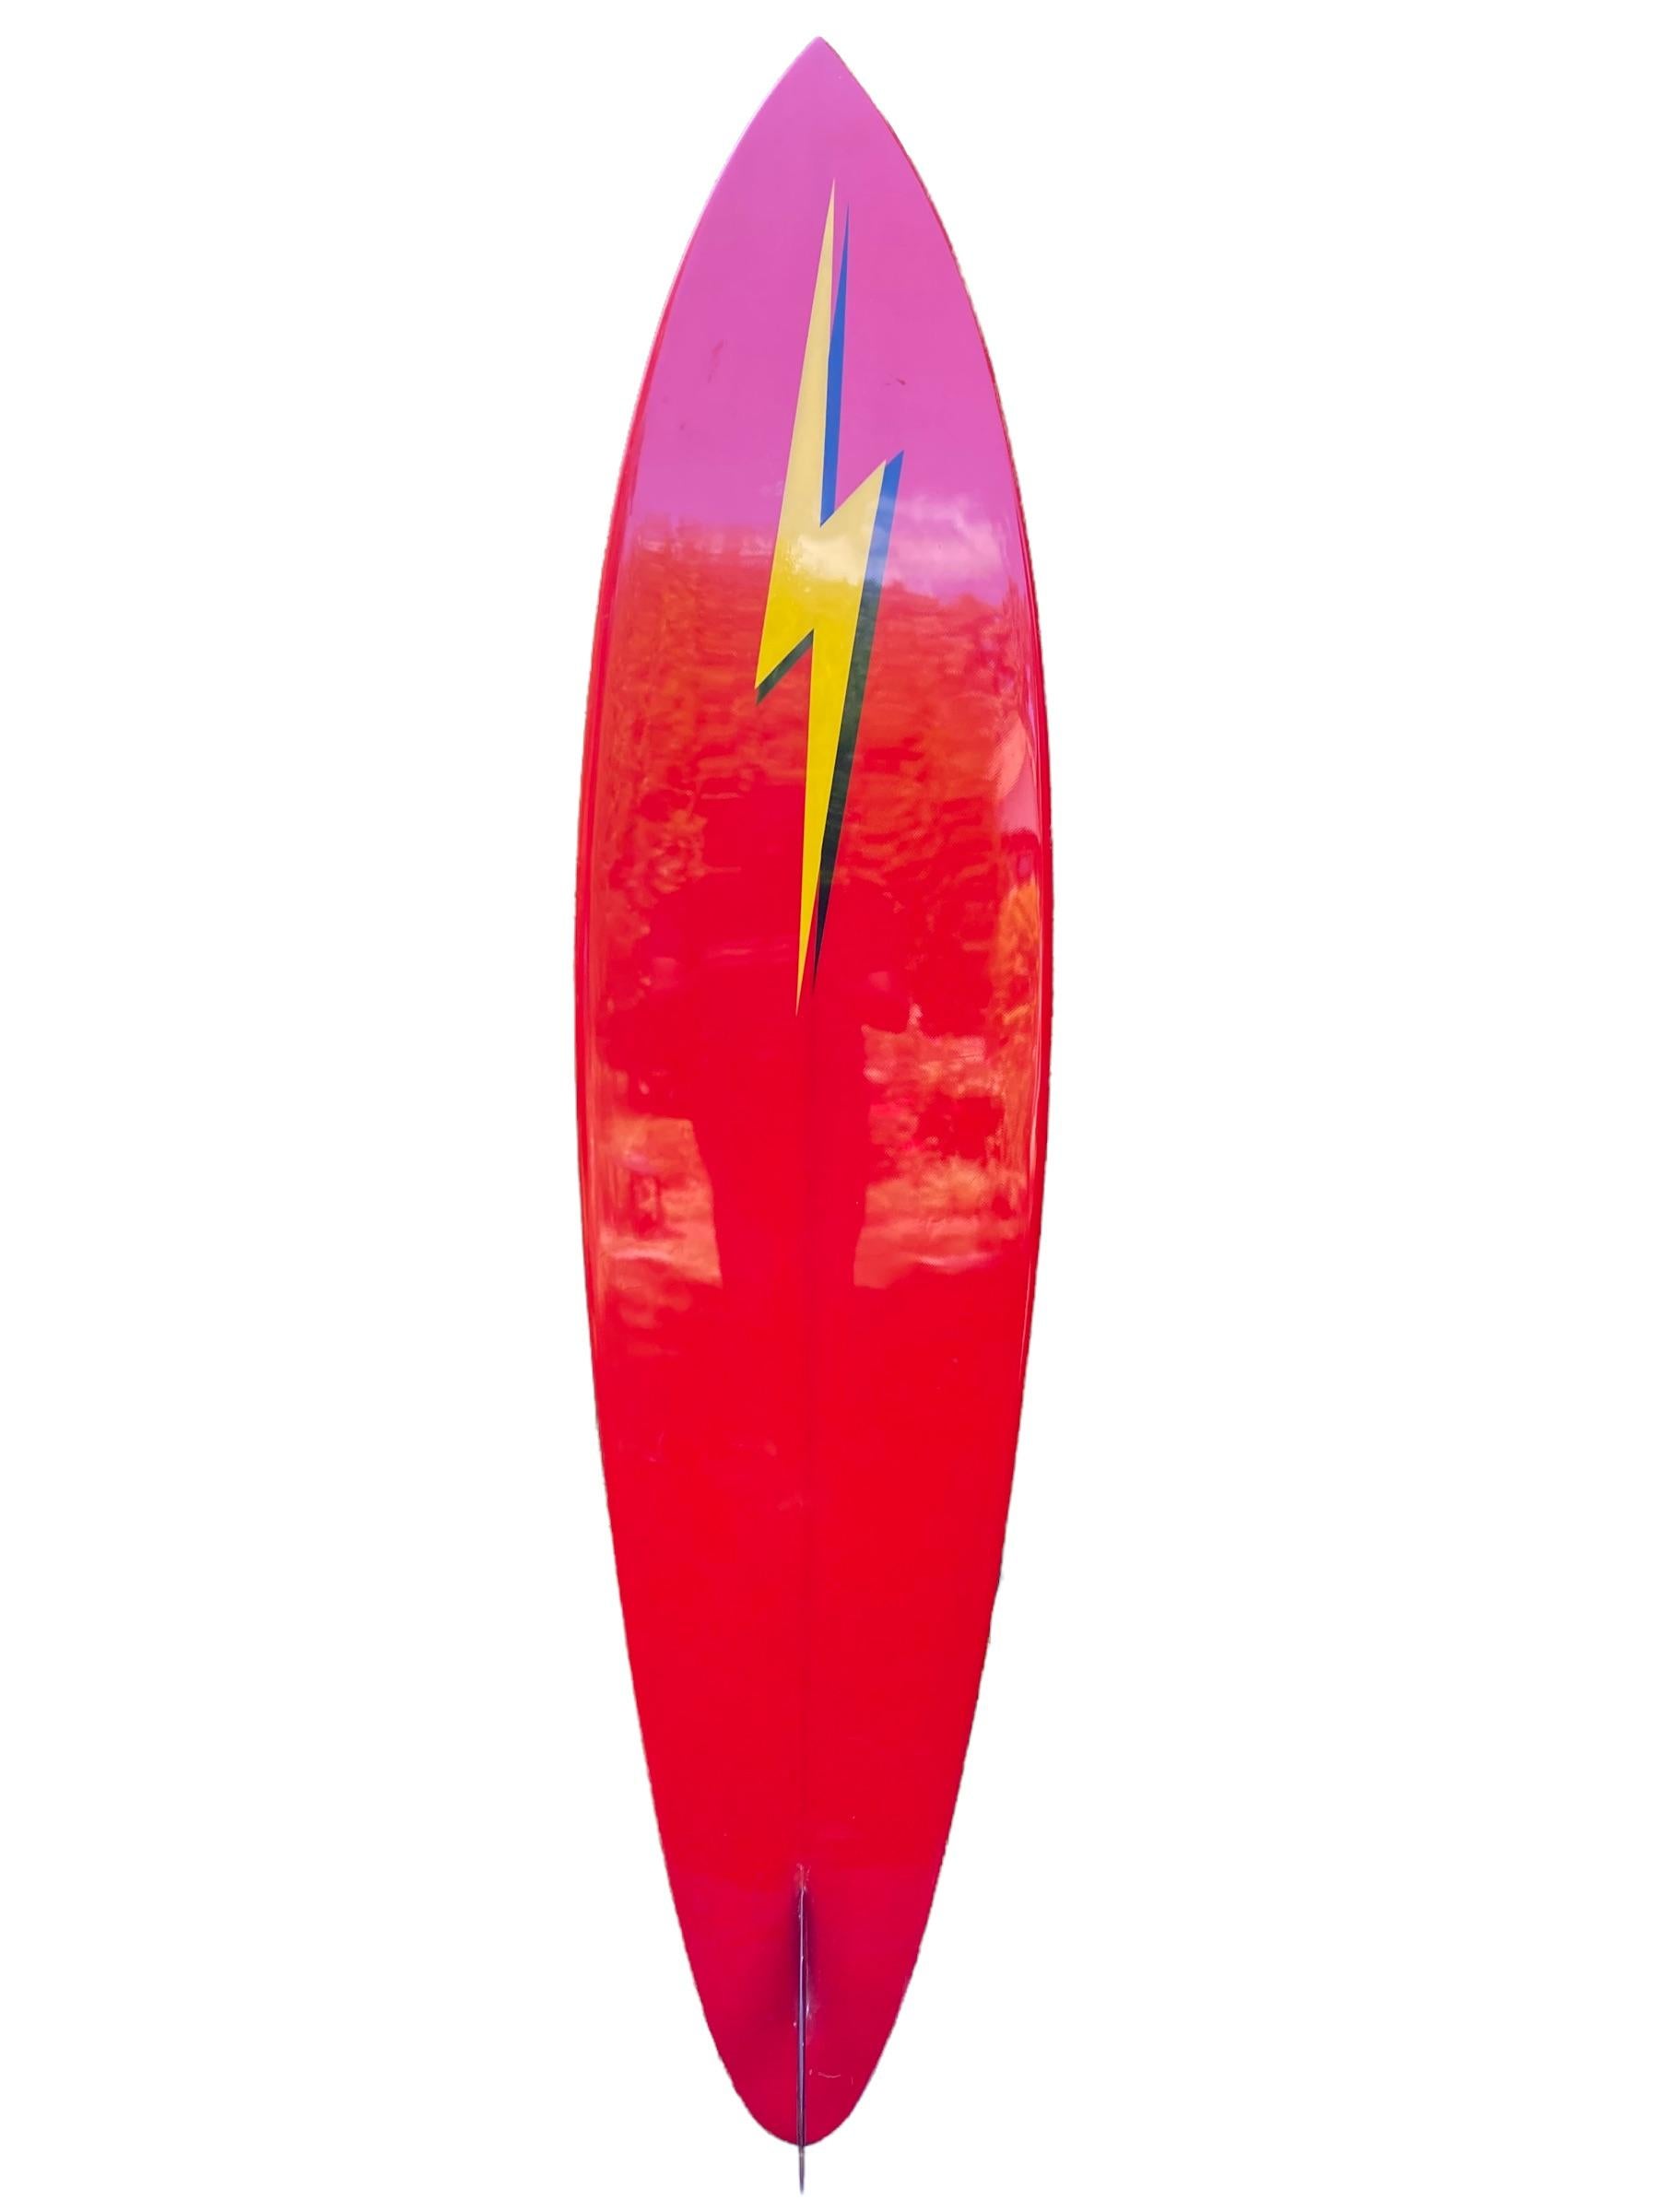 Early-1970s Lightning Bolt surfboard made by Bill Barnfield. Features a roundpin shape with vibrant yellow and red colors and glassed-on single fin. A remarkable example of a restored early 1970s vintage Lightning Bolt surfboard. 

In 1972, Gerry